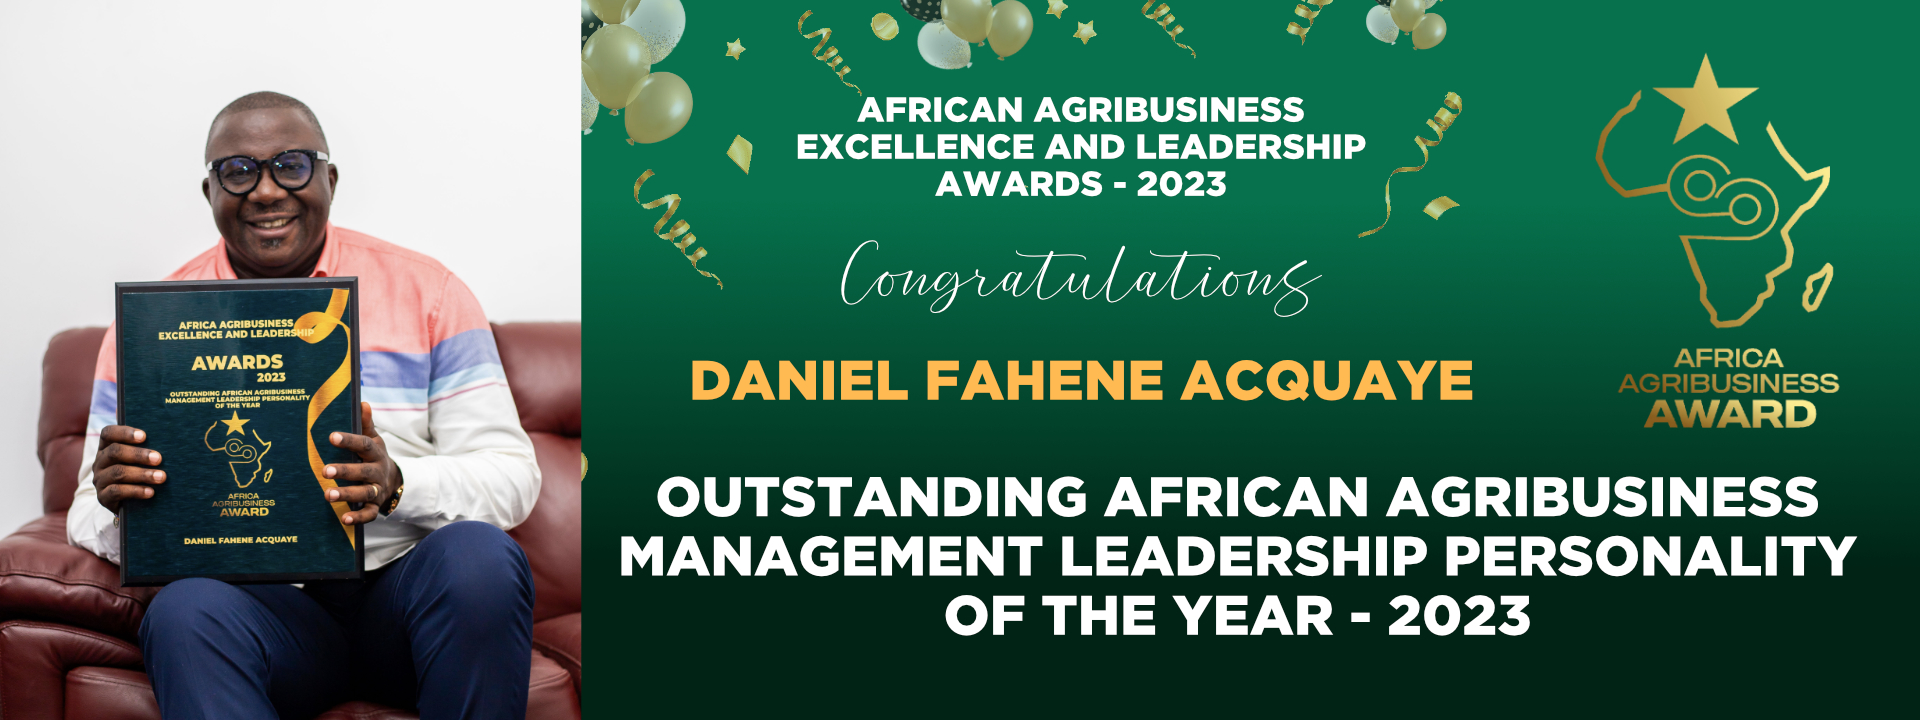 Outstanding African Agribusiness Management Leadership Personality of the year. - 2023